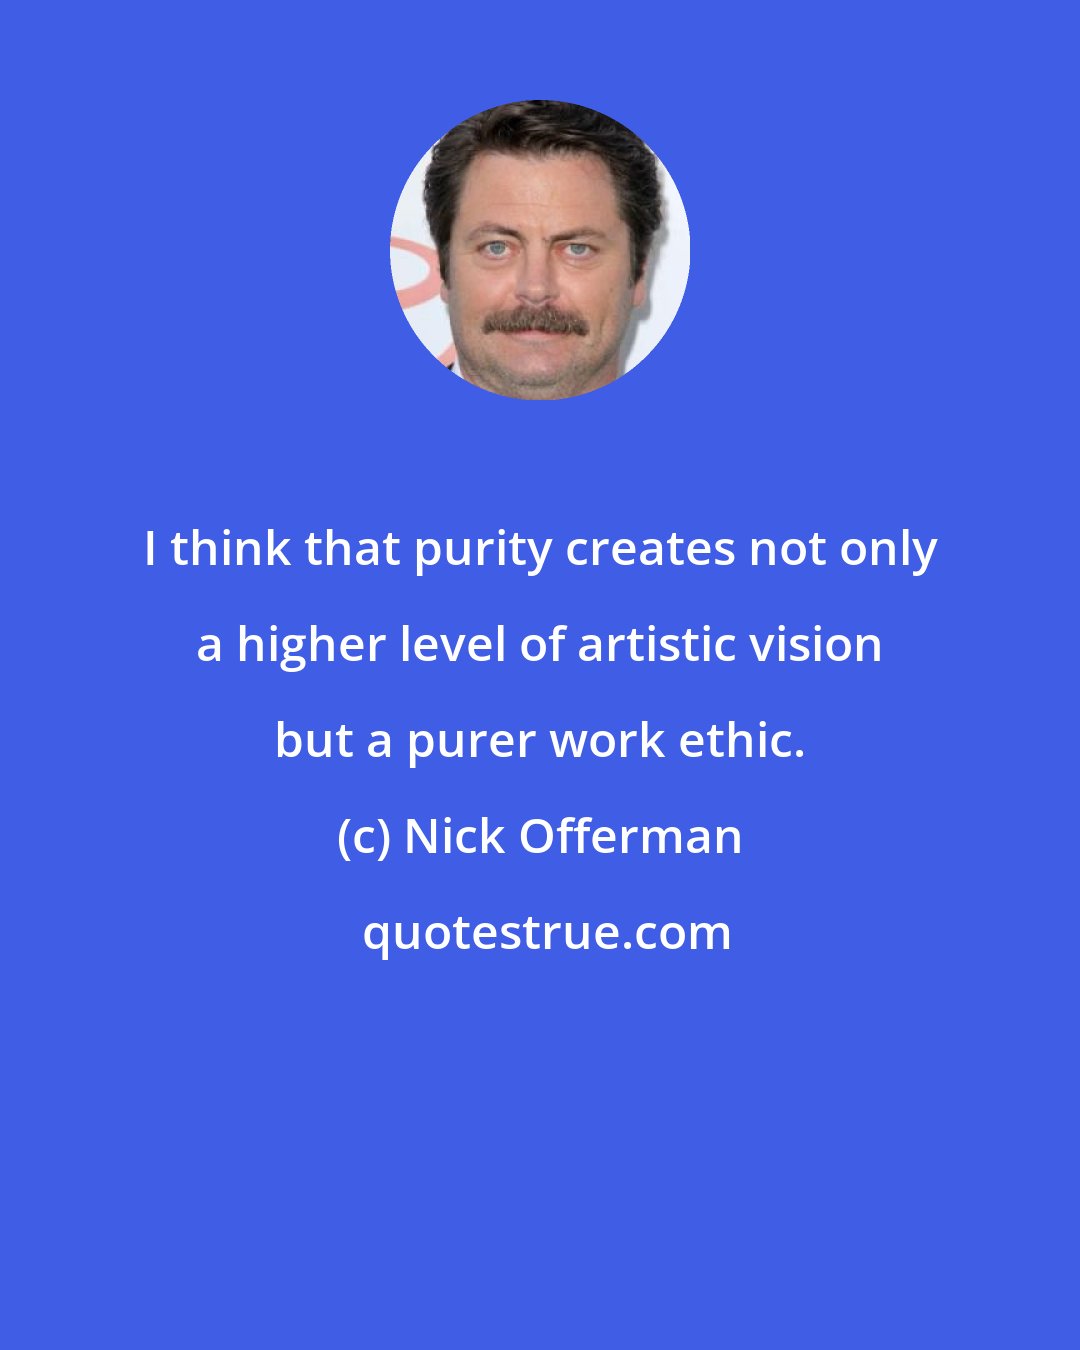 Nick Offerman: I think that purity creates not only a higher level of artistic vision but a purer work ethic.